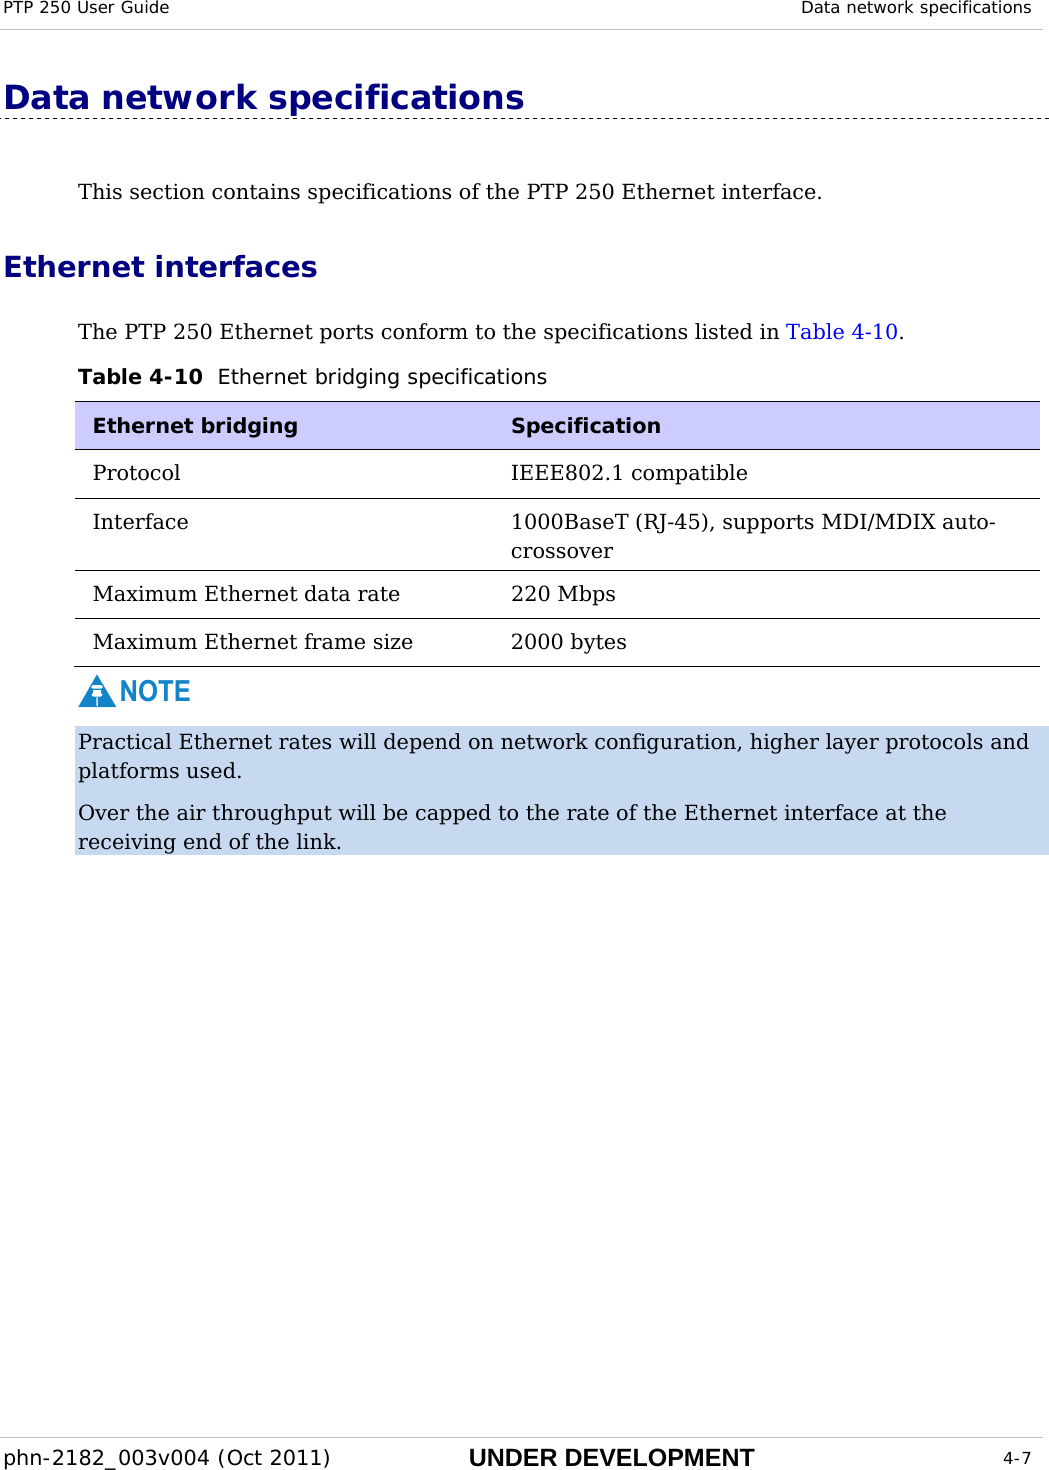 PTP 250 User Guide  Data network specifications  phn-2182_003v004 (Oct 2011)  UNDER DEVELOPMENT  4-7  Data network specifications This section contains specifications of the PTP 250 Ethernet interface. Ethernet interfaces The PTP 250 Ethernet ports conform to the specifications listed in Table 4-10. Table 4-10  Ethernet bridging specifications Ethernet bridging   Specification Protocol   IEEE802.1 compatible  Interface   1000BaseT (RJ-45), supports MDI/MDIX auto-crossover  Maximum Ethernet data rate  220 Mbps Maximum Ethernet frame size  2000 bytes NOTE Practical Ethernet rates will depend on network configuration, higher layer protocols and platforms used. Over the air throughput will be capped to the rate of the Ethernet interface at the receiving end of the link.  